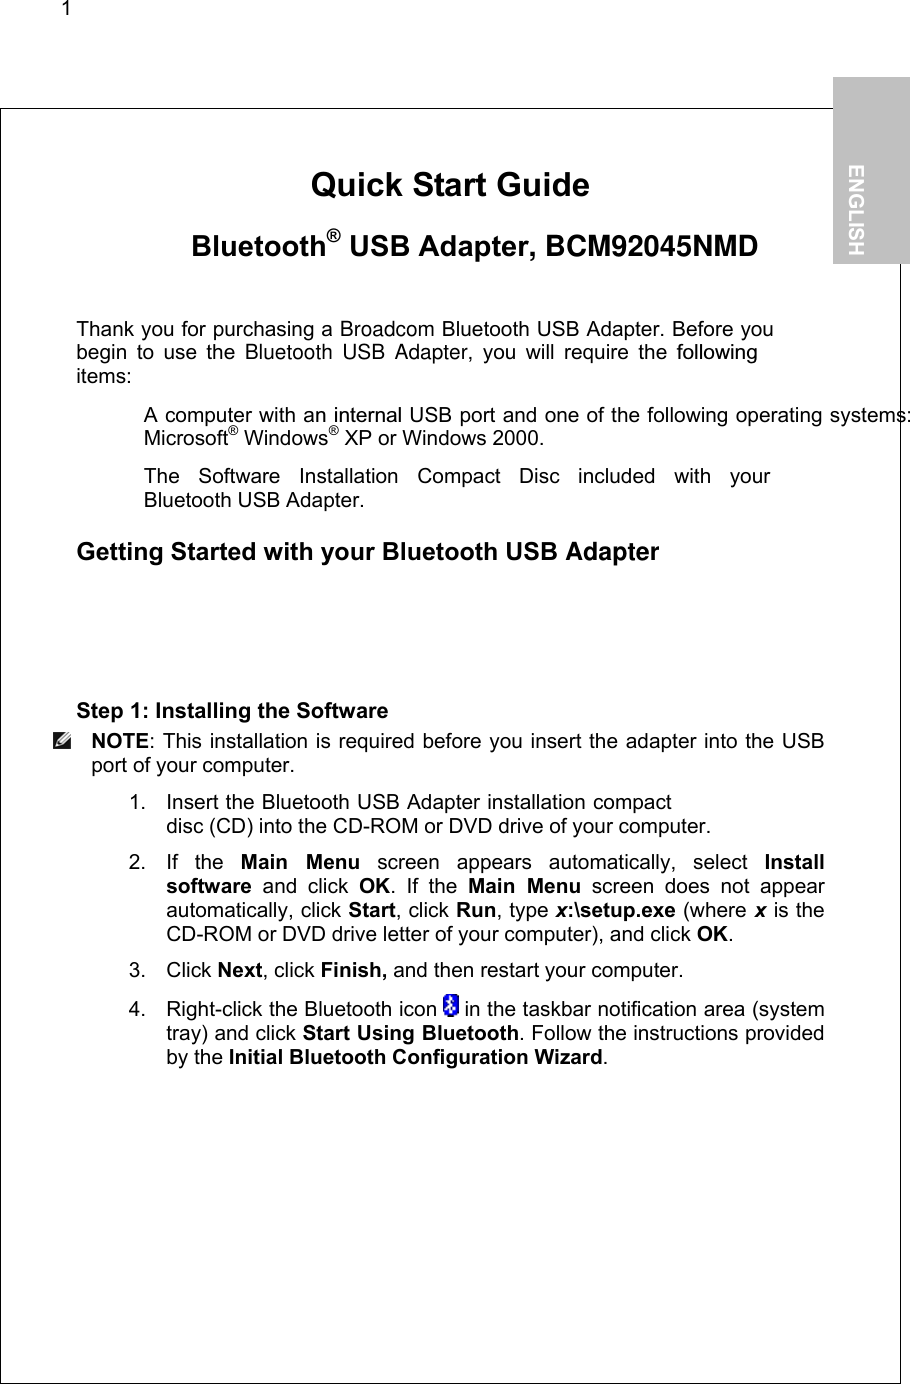 1        Quick Start Guide     Bluetooth® USB Adapter, BCM92045NMD  Thank you for purchasing a Broadcom Bluetooth USB Adapter. Before you begin to use the Bluetooth USB Adapter, you will require the followingitems:   A computer with an internal USB port and one of the following operating systems: Microsoft® Windows® XP or Windows 2000.   The Software Installation Compact Disc included with your  Bluetooth USB Adapter.  Getting Started with your Bluetooth USB Adapter  Step 1: Installing the Software  NOTE: This installation is required before you insert the adapter into the USB port of your computer. 1. Insert the Bluetooth USB Adapter installation compact disc (CD) into the CD-ROM or DVD drive of your computer. 2. If the Main Menu screen appears automatically, select Install software and click OK. If the Main Menu screen does not appear automatically, click Start, click Run, type x:\setup.exe (where x is the CD-ROM or DVD drive letter of your computer), and click OK. 3. Click Next, click Finish, and then restart your computer. 4.  Right-click the Bluetooth icon   in the taskbar notification area (system tray) and click Start Using Bluetooth. Follow the instructions provided by the Initial Bluetooth Configuration Wizard.   1.           ENGLISH  